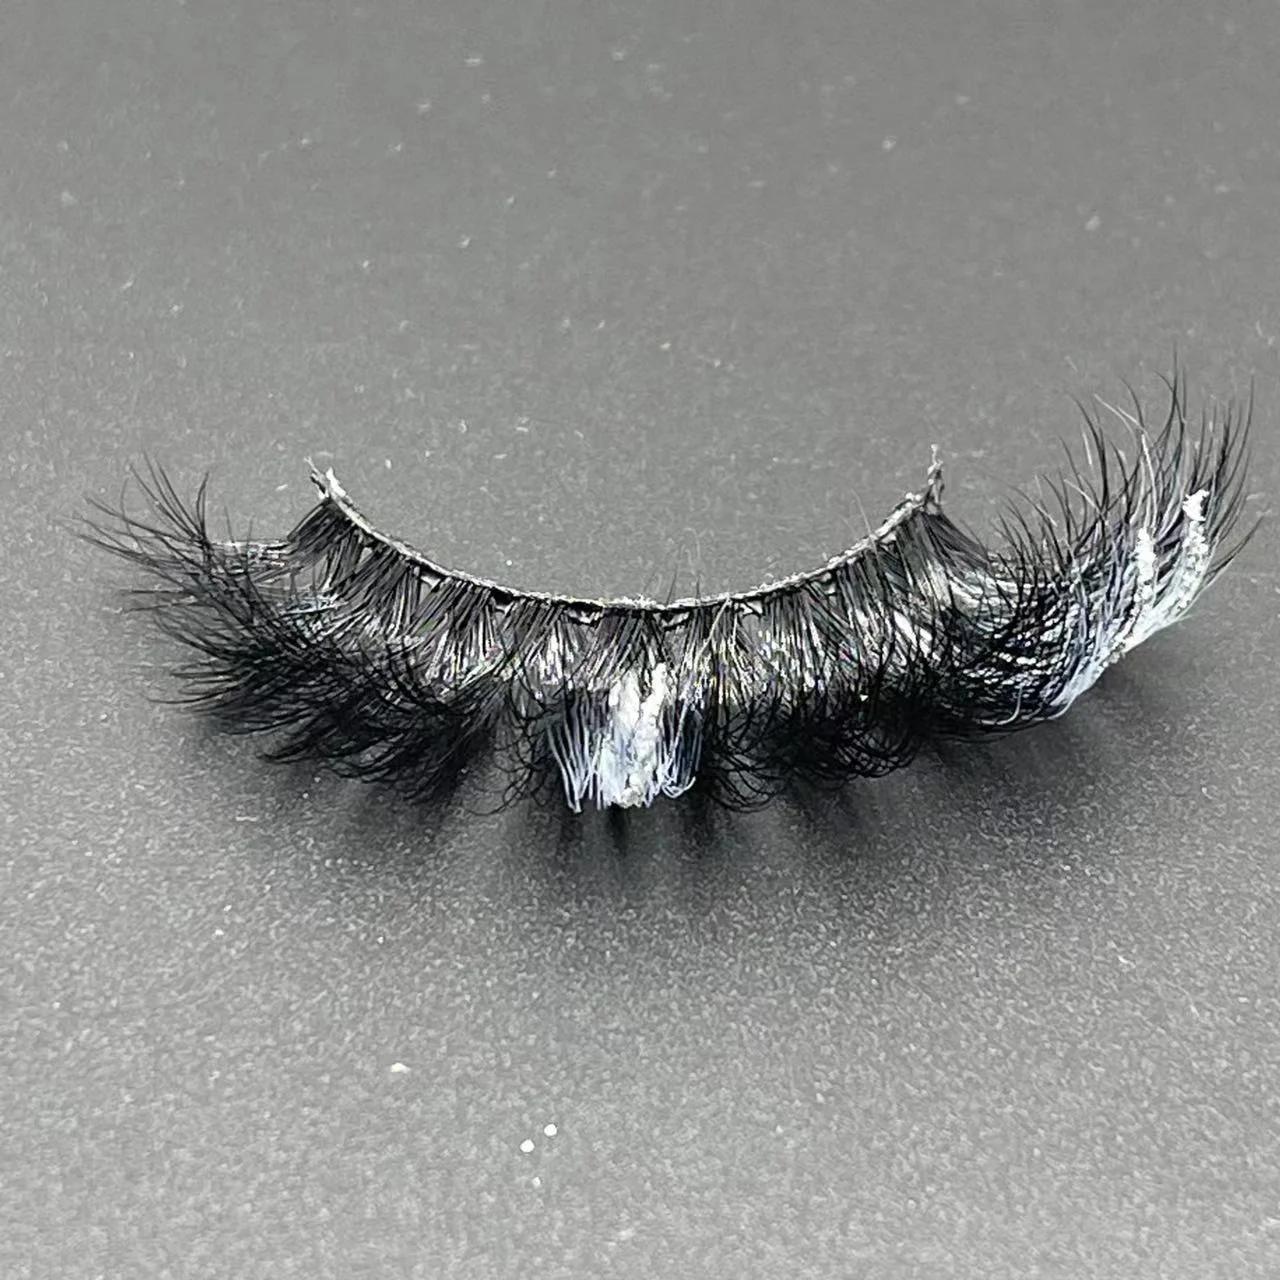 Hbzgtlad Colored Lashes Glitter Mink 15mm -20mm Fluffy Color Streaks Cosplay Makeup Beauty Eyelashes -Outlet Maid Outfit Store Sff715a61167e4a86a40b1c1682a8bb0cG.jpg